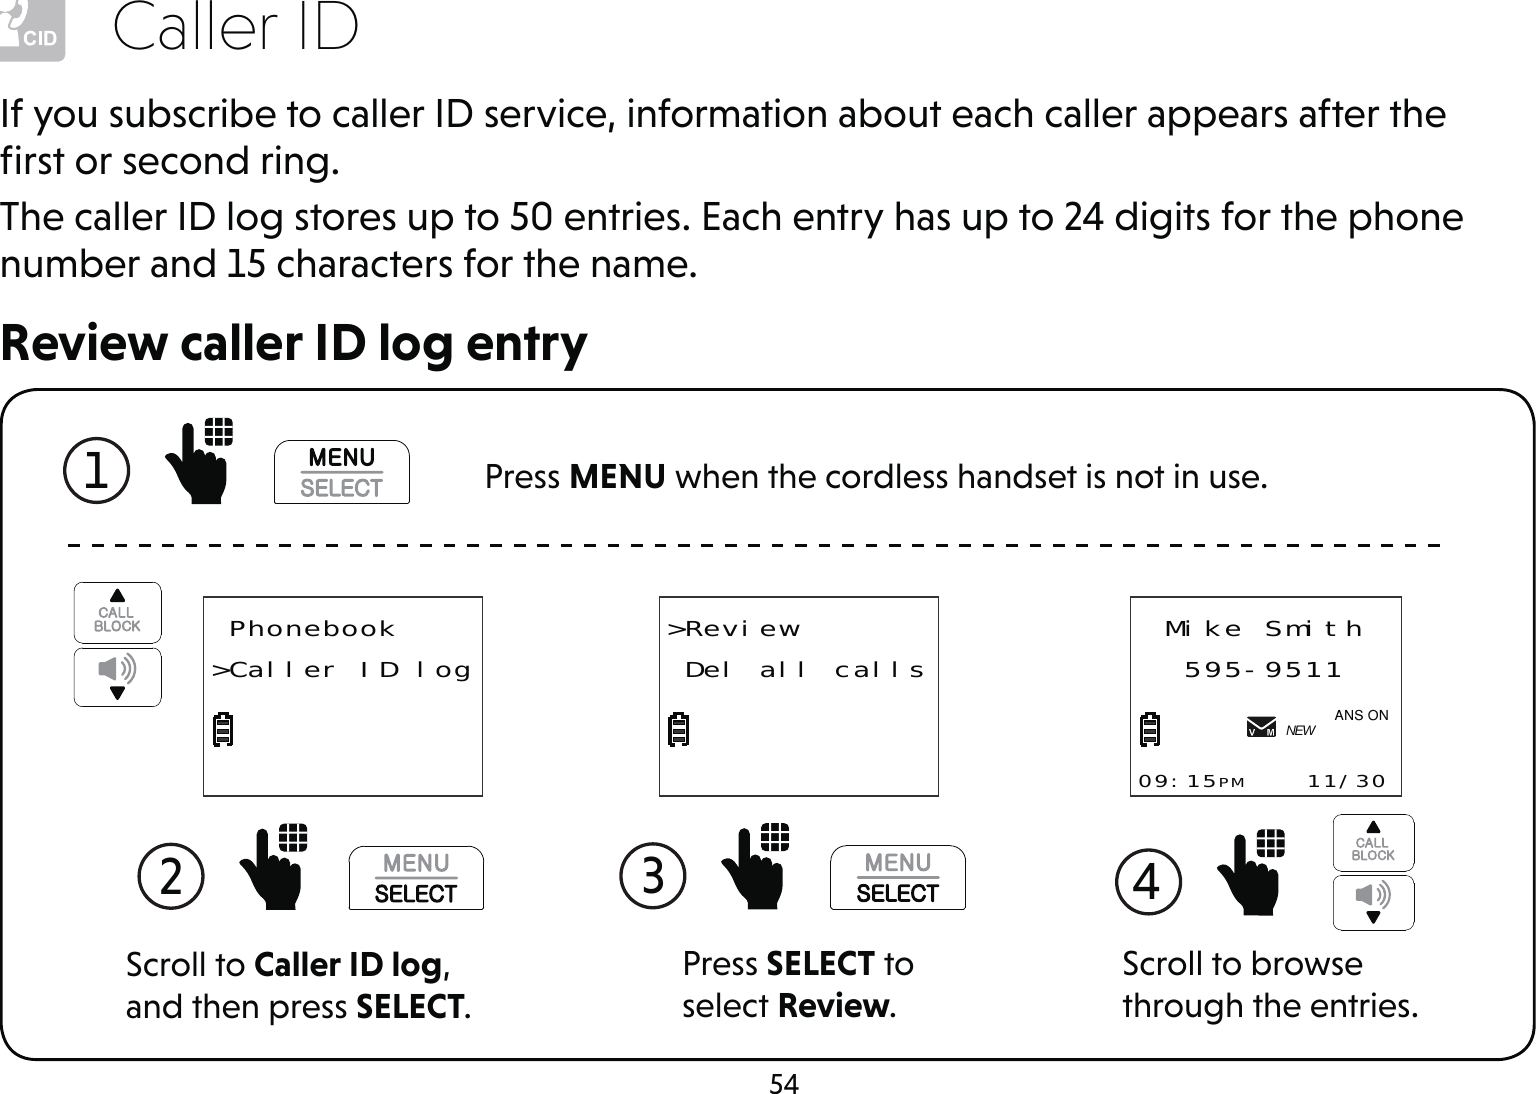 54Caller IDReview caller ID log entryIf you subscribe to caller ID service, information about each caller appears after the ﬁrst or second ring.The caller ID log stores up to 50 entries. Each entry has up to 24 digits for the phone number and 15 characters for the name.1   Press MENU when the cordless handset is not in use.Press SELECT to select Review.3 &gt;Review Del all callsScroll to browse through the entries.4 Mike Smith595-951109:15PM    11/30NEW$1621Scroll to Caller ID log, and then press SELECT.2  Phonebook&gt;Caller ID log